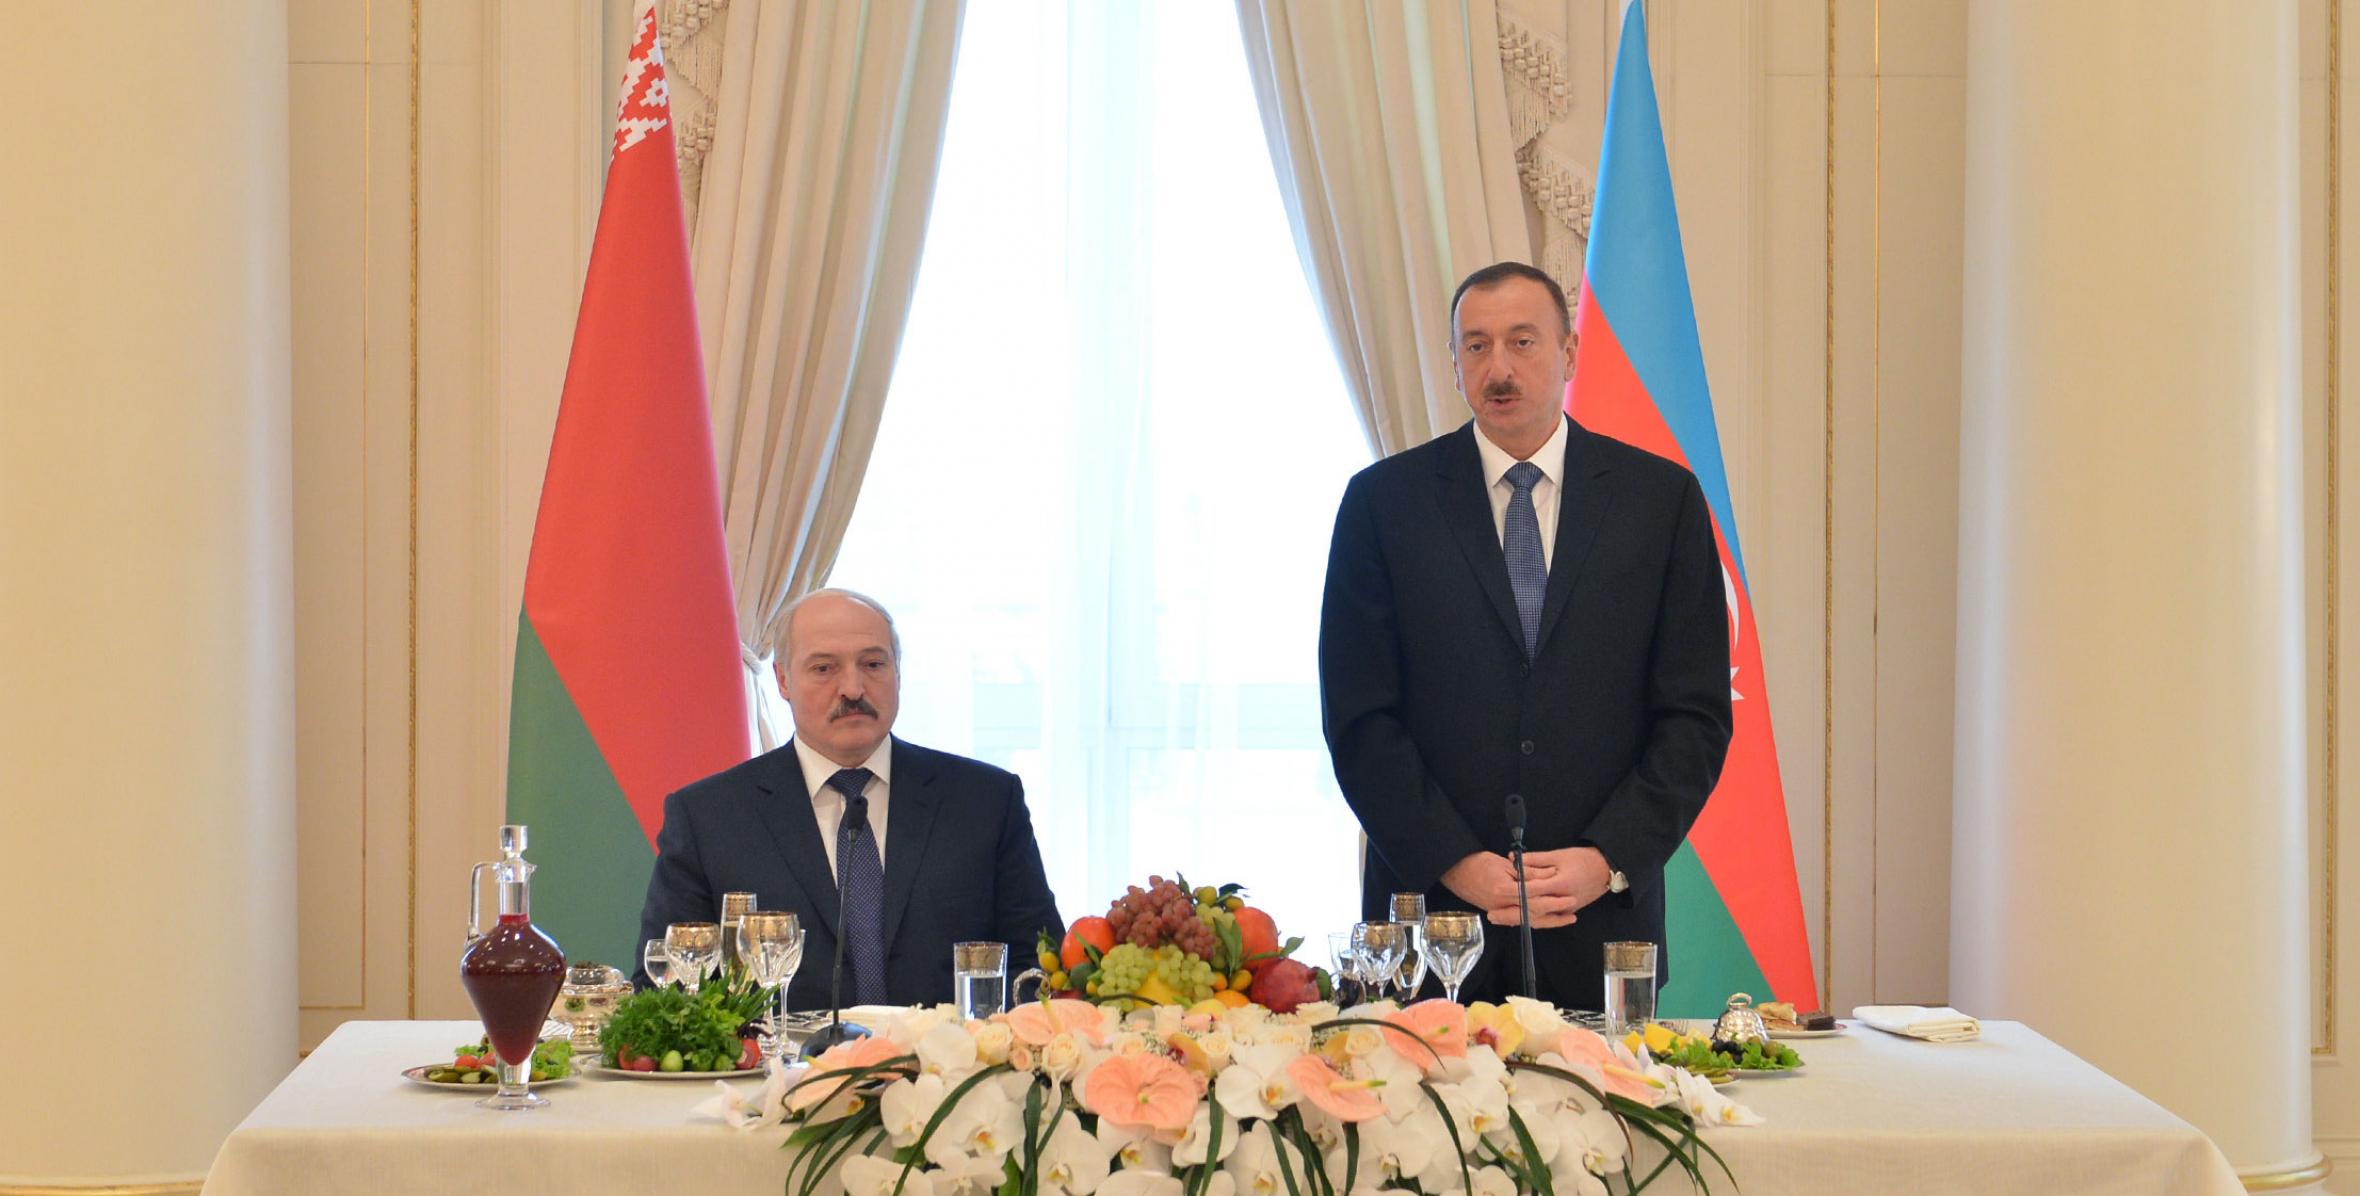 An official dinner was given in honour of President of the Republic of Belarus Aleksandr Lukashenko on behalf of Ilham Aliyev